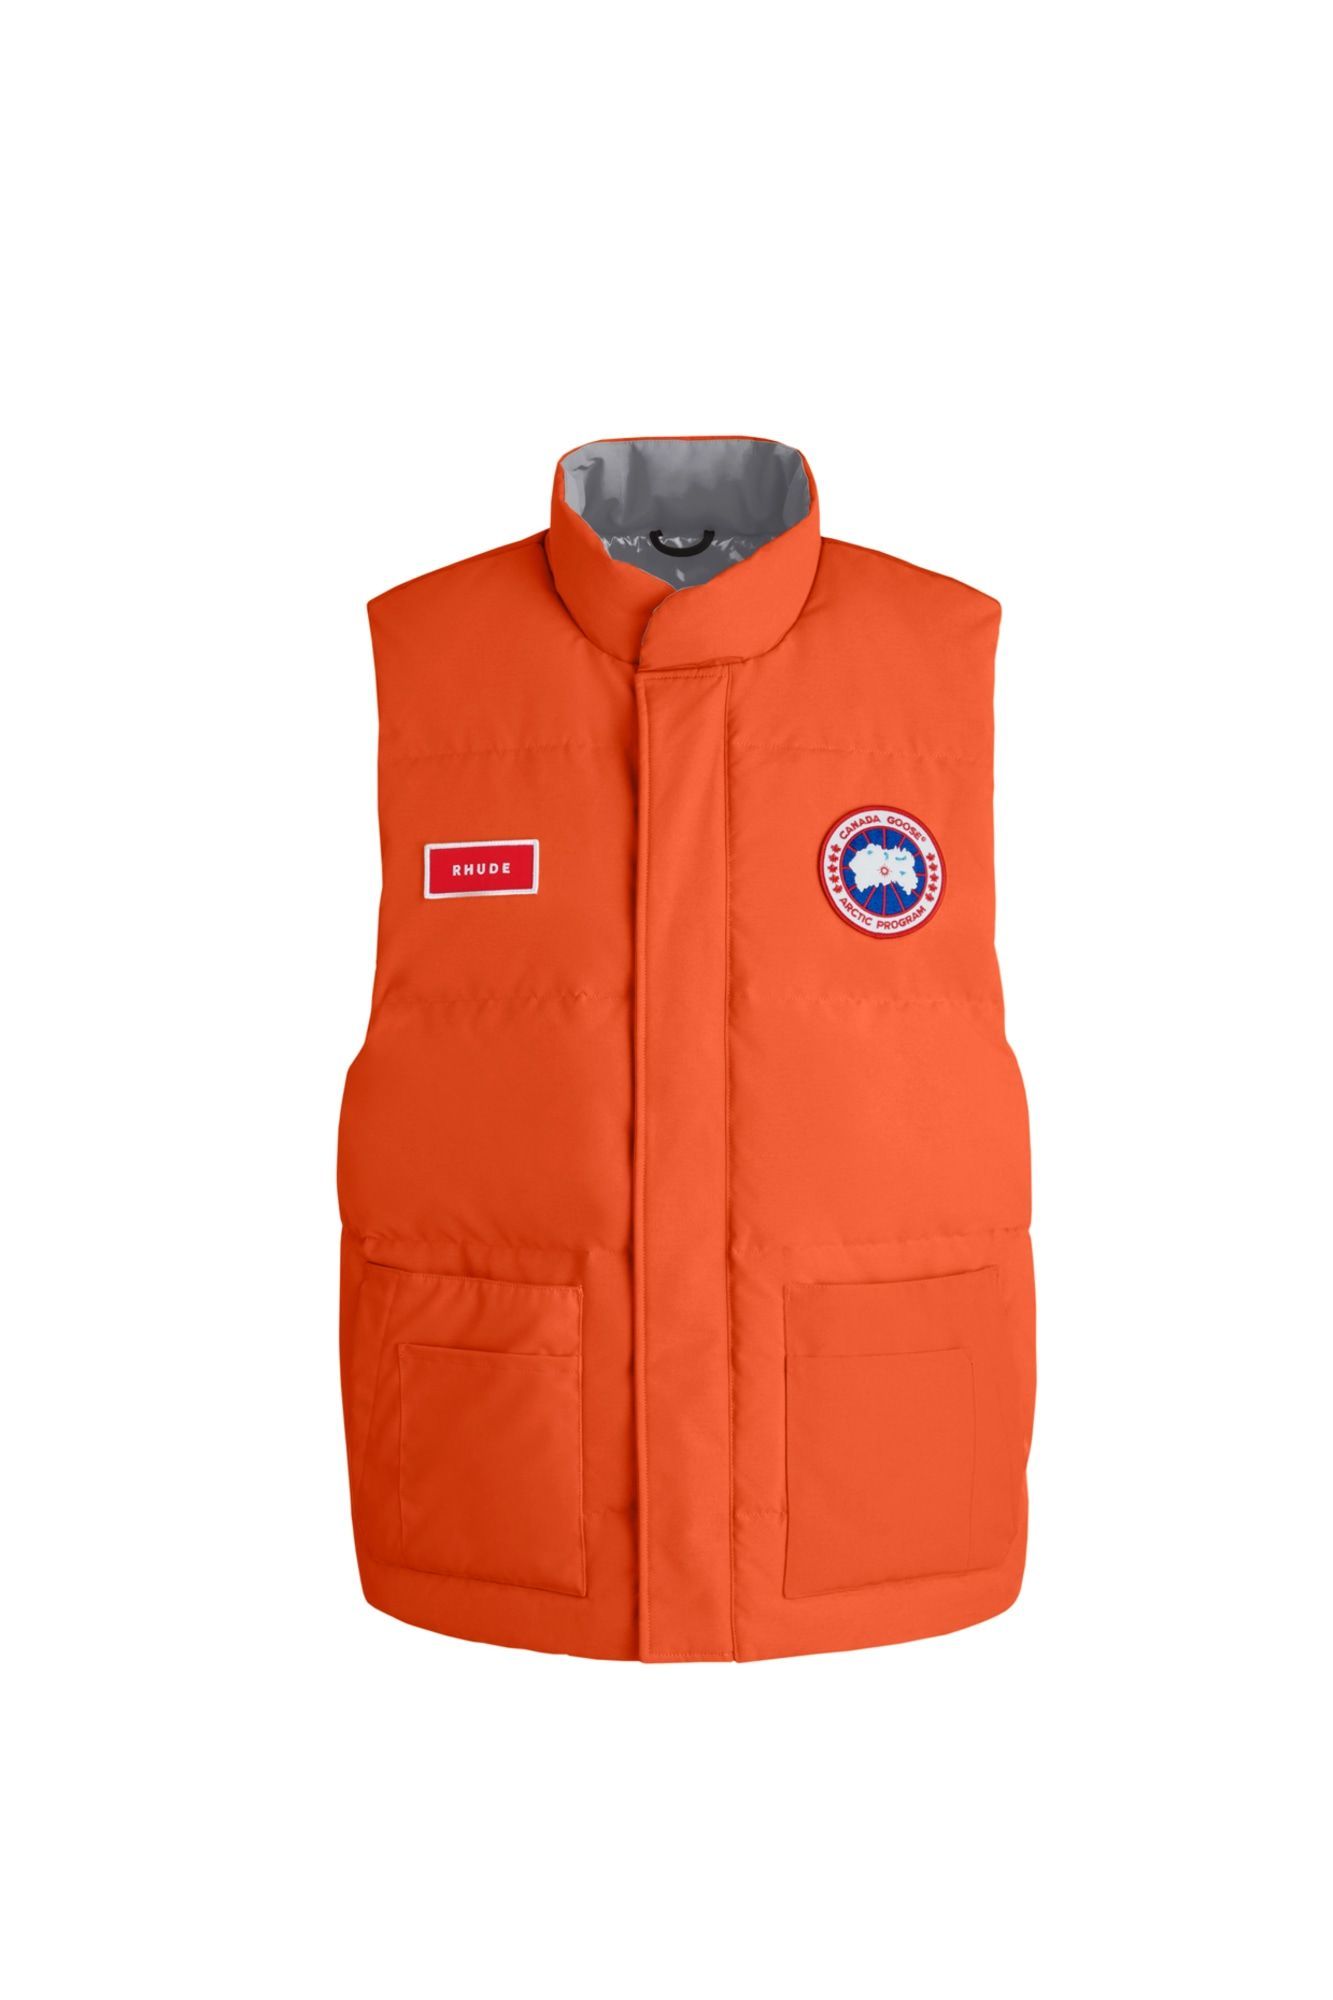 Freestyle Vest by Rhude